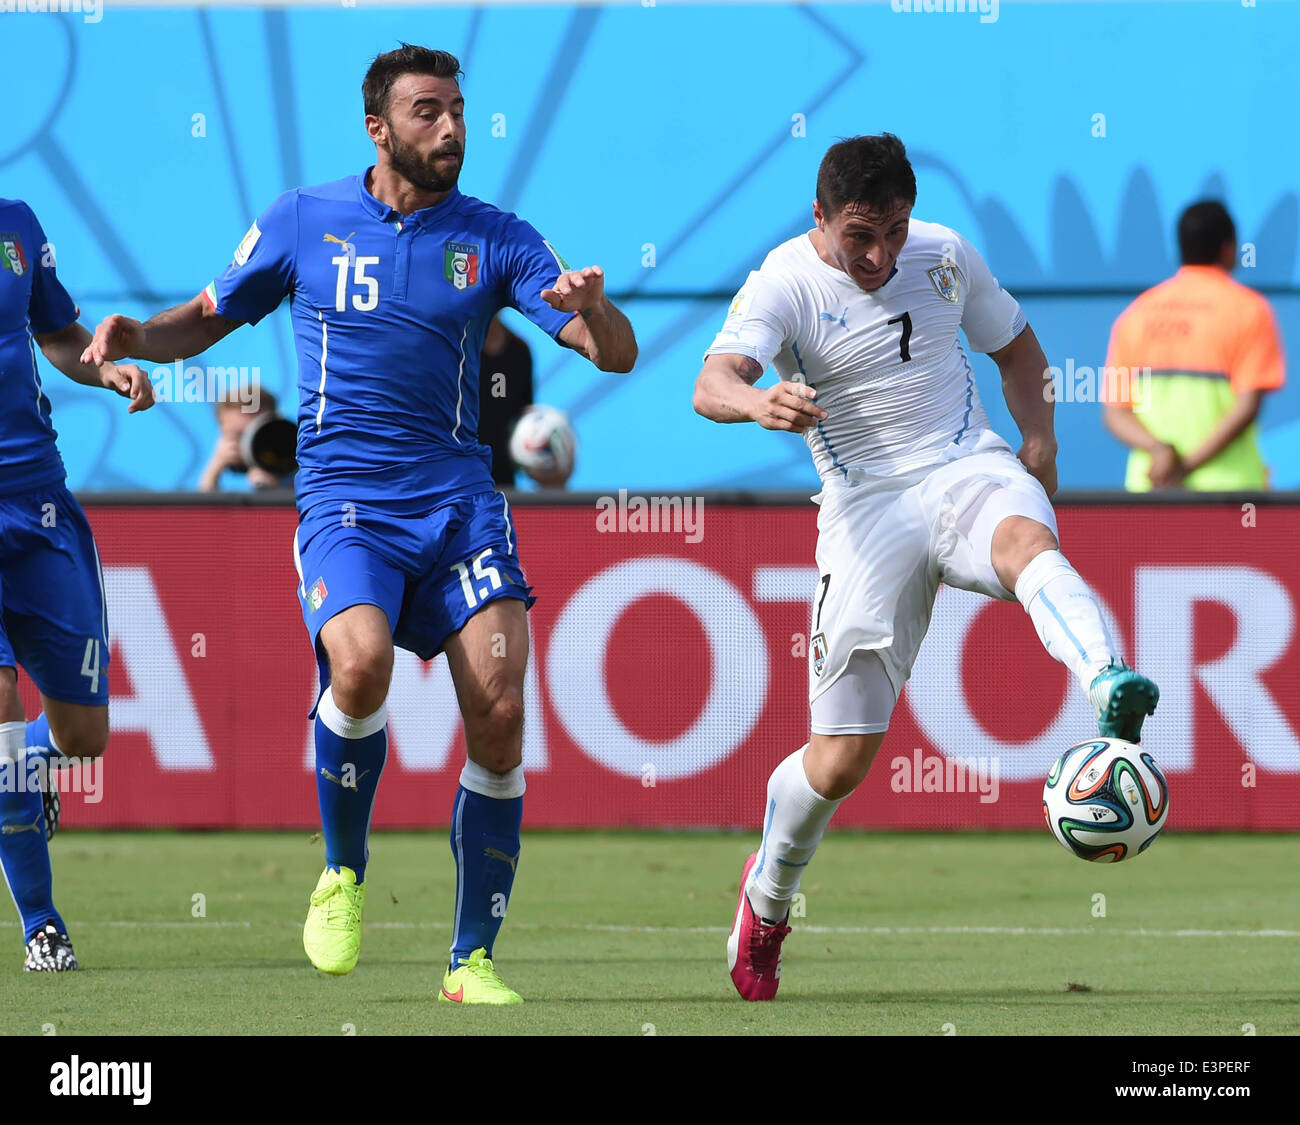 Natal, Brazil. 24th June, 2014. Italy's Andrea Barzagli vies with Uruguay's Cristian Rodriguez during a Group D match between Italy and Uruguay of 2014 FIFA World Cup at the Estadio das Dunas Stadium in Natal, Brazil, June 24, 2014. © Guo Yong/Xinhua/Alamy Live News Stock Photo